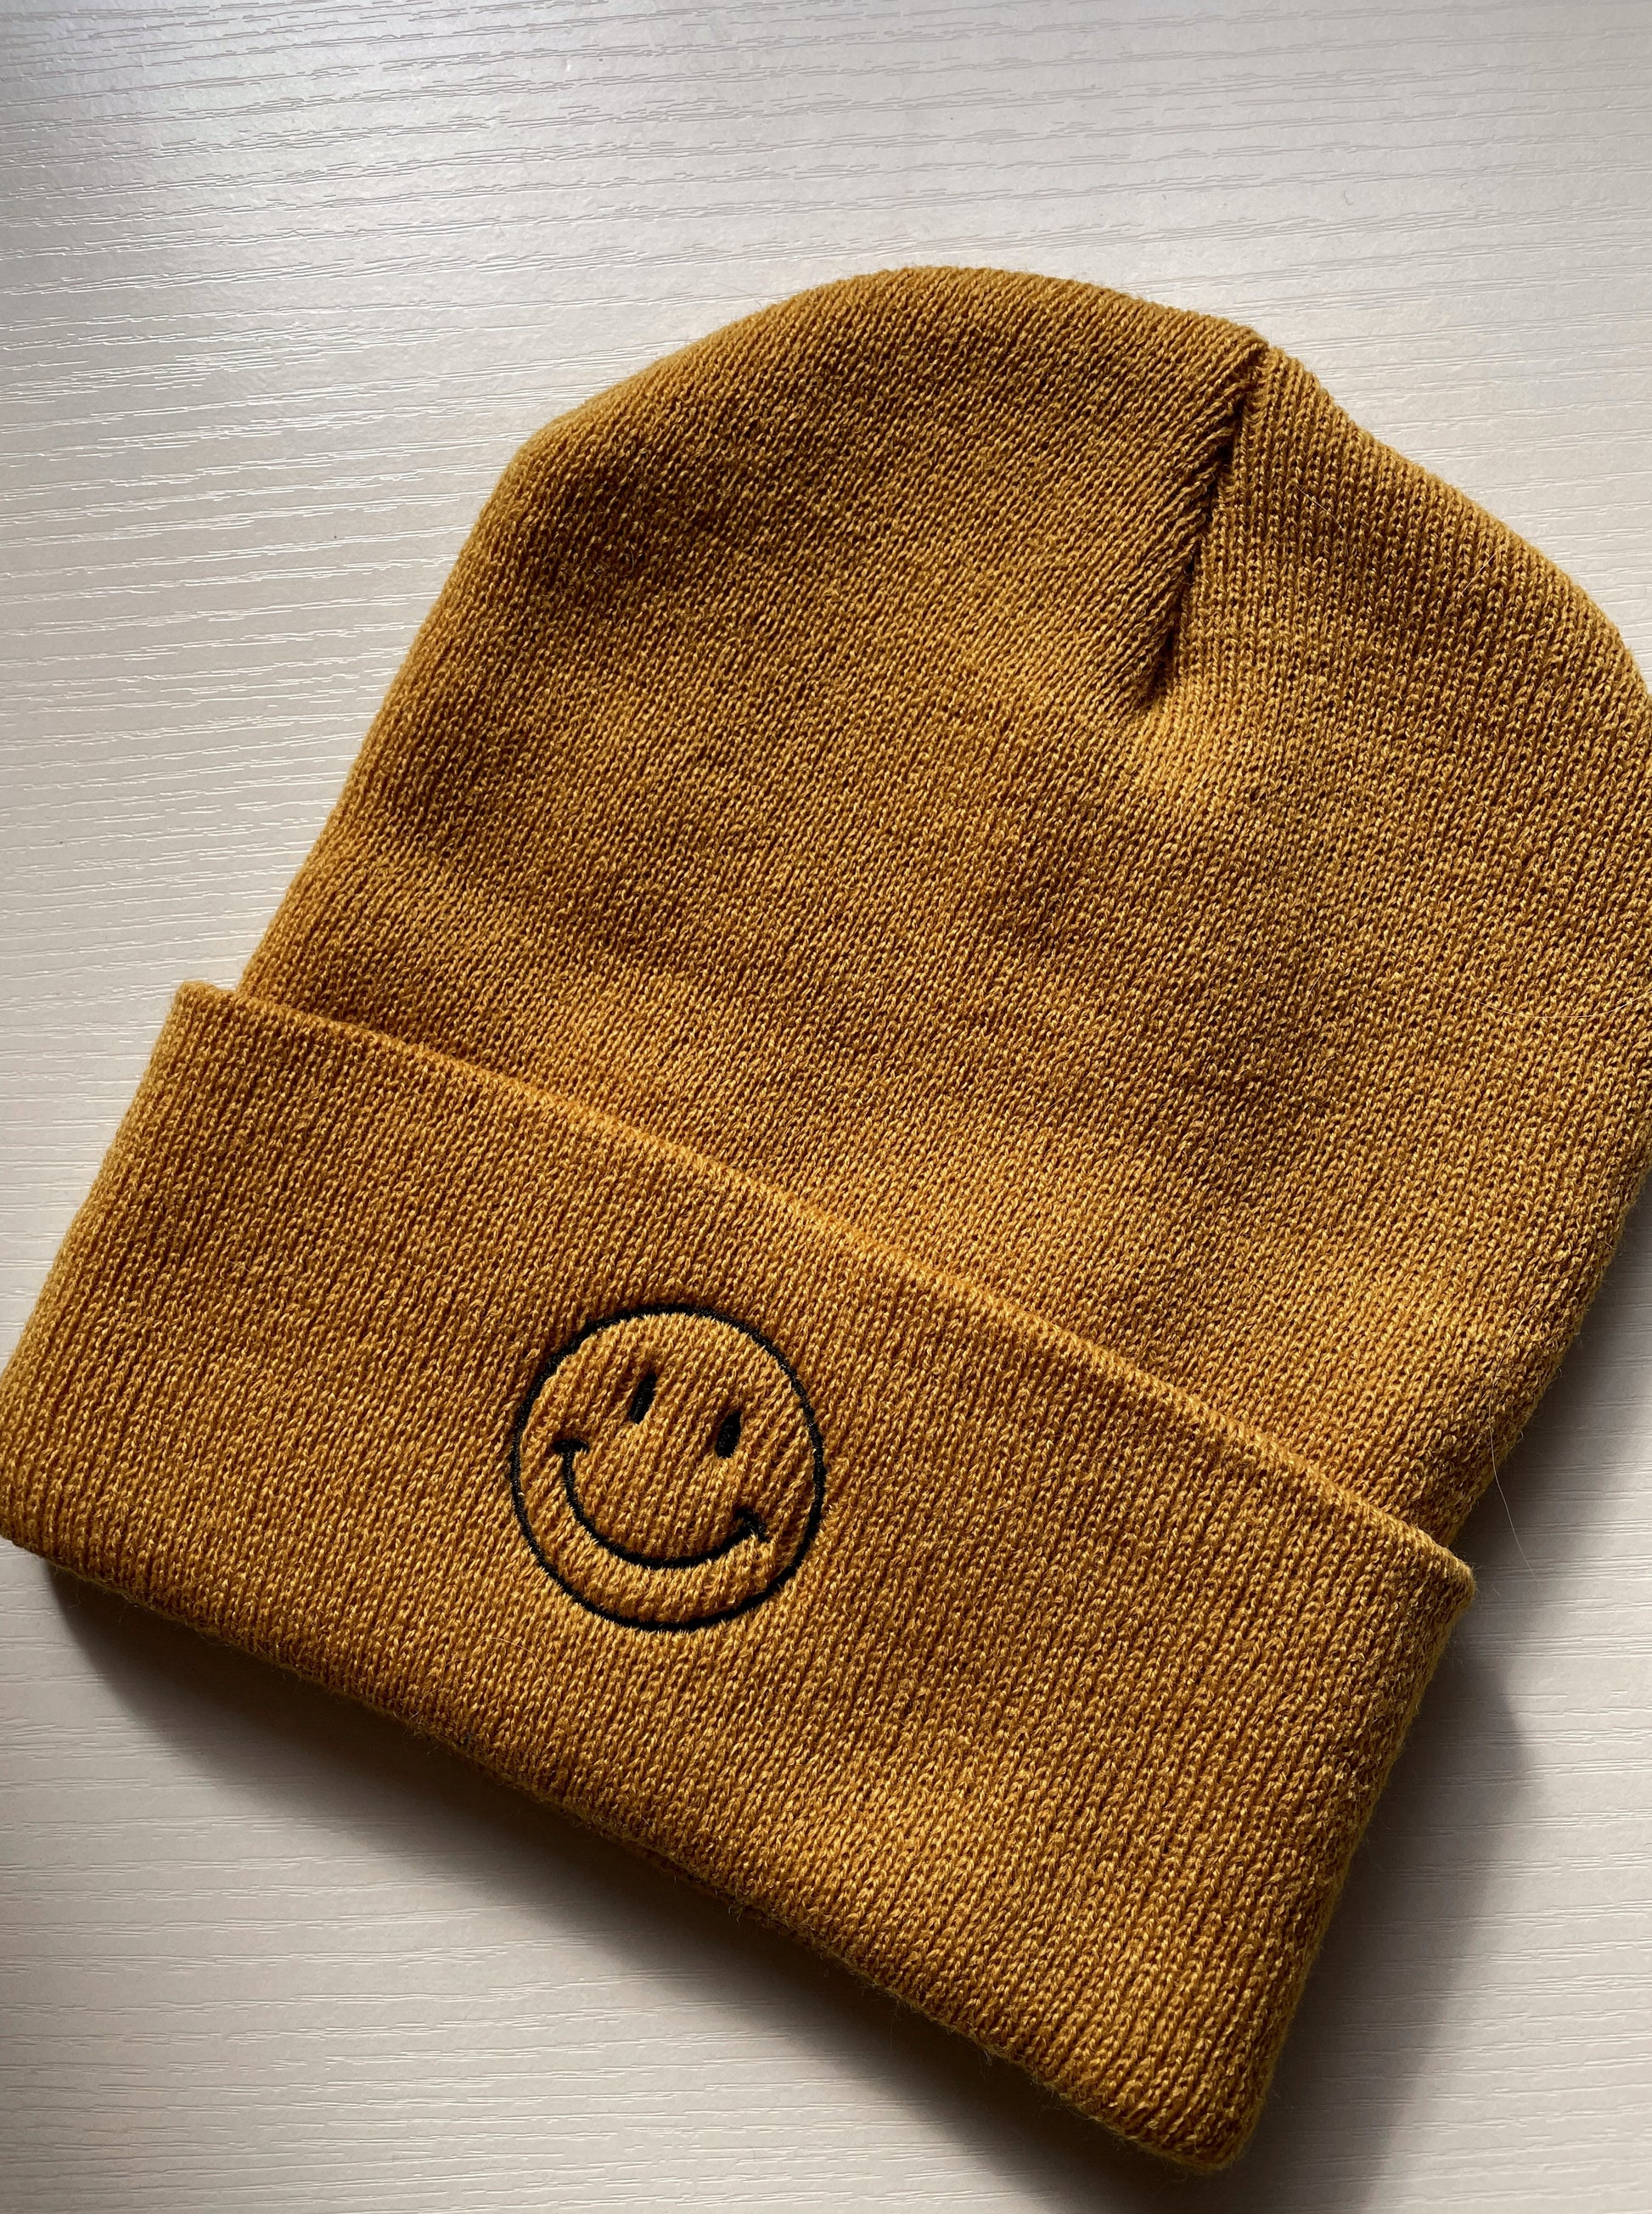 Beanie with Smile Outlined Embroidery Detail